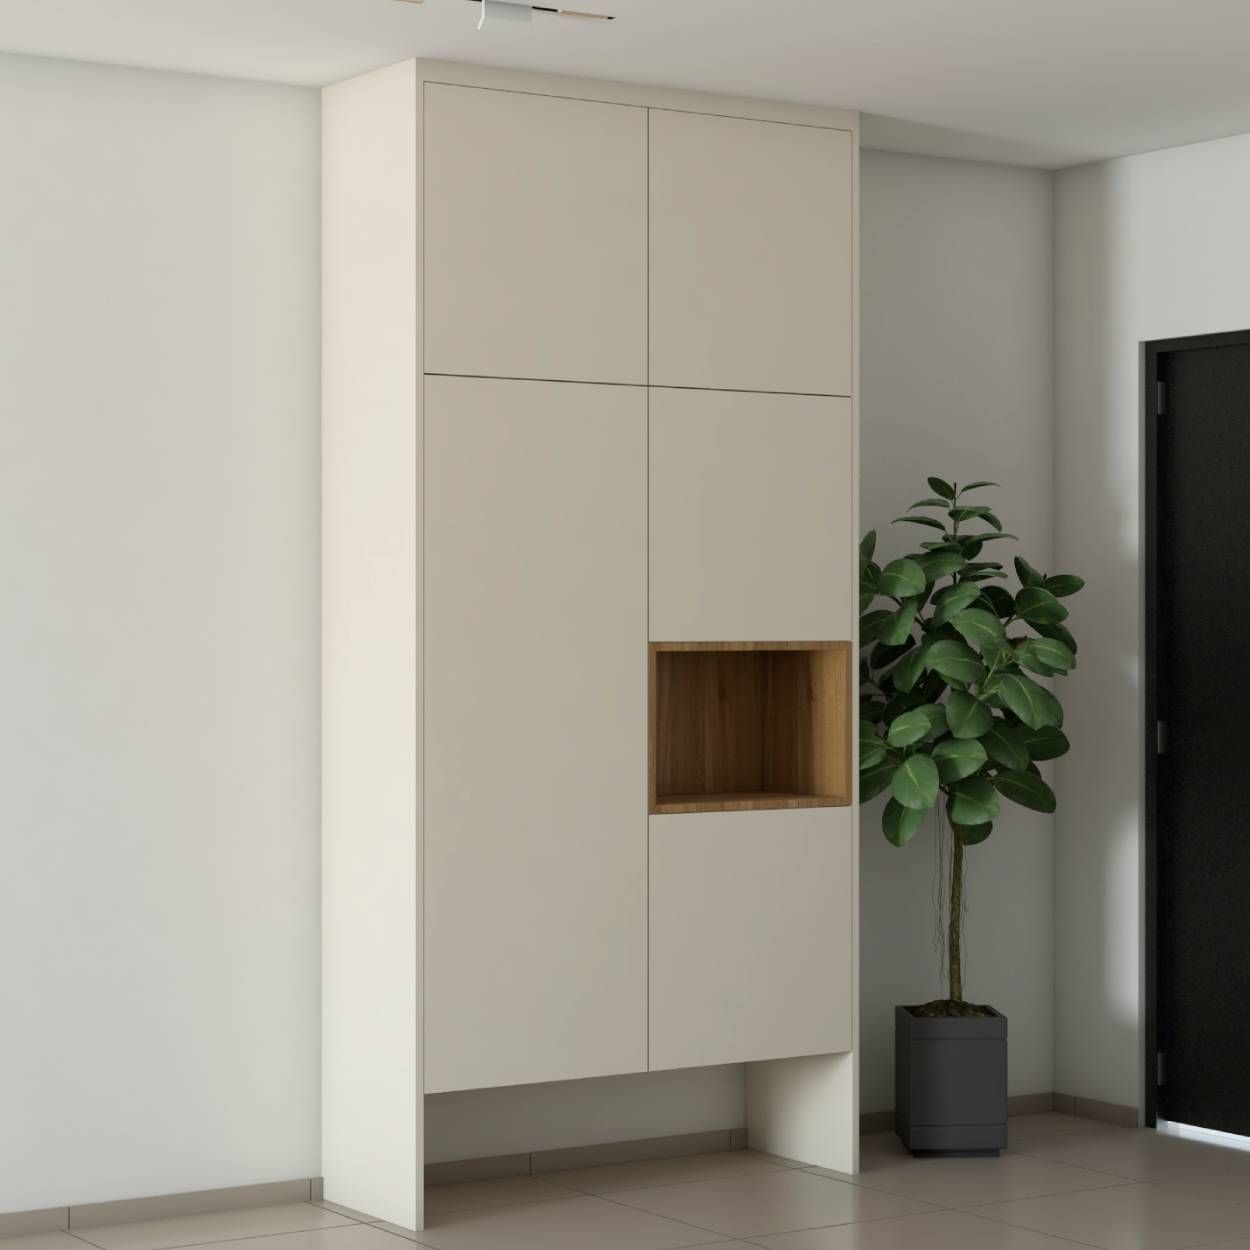 Minimal Foyer Design With A Floor-To-Ceiling Storage Unit